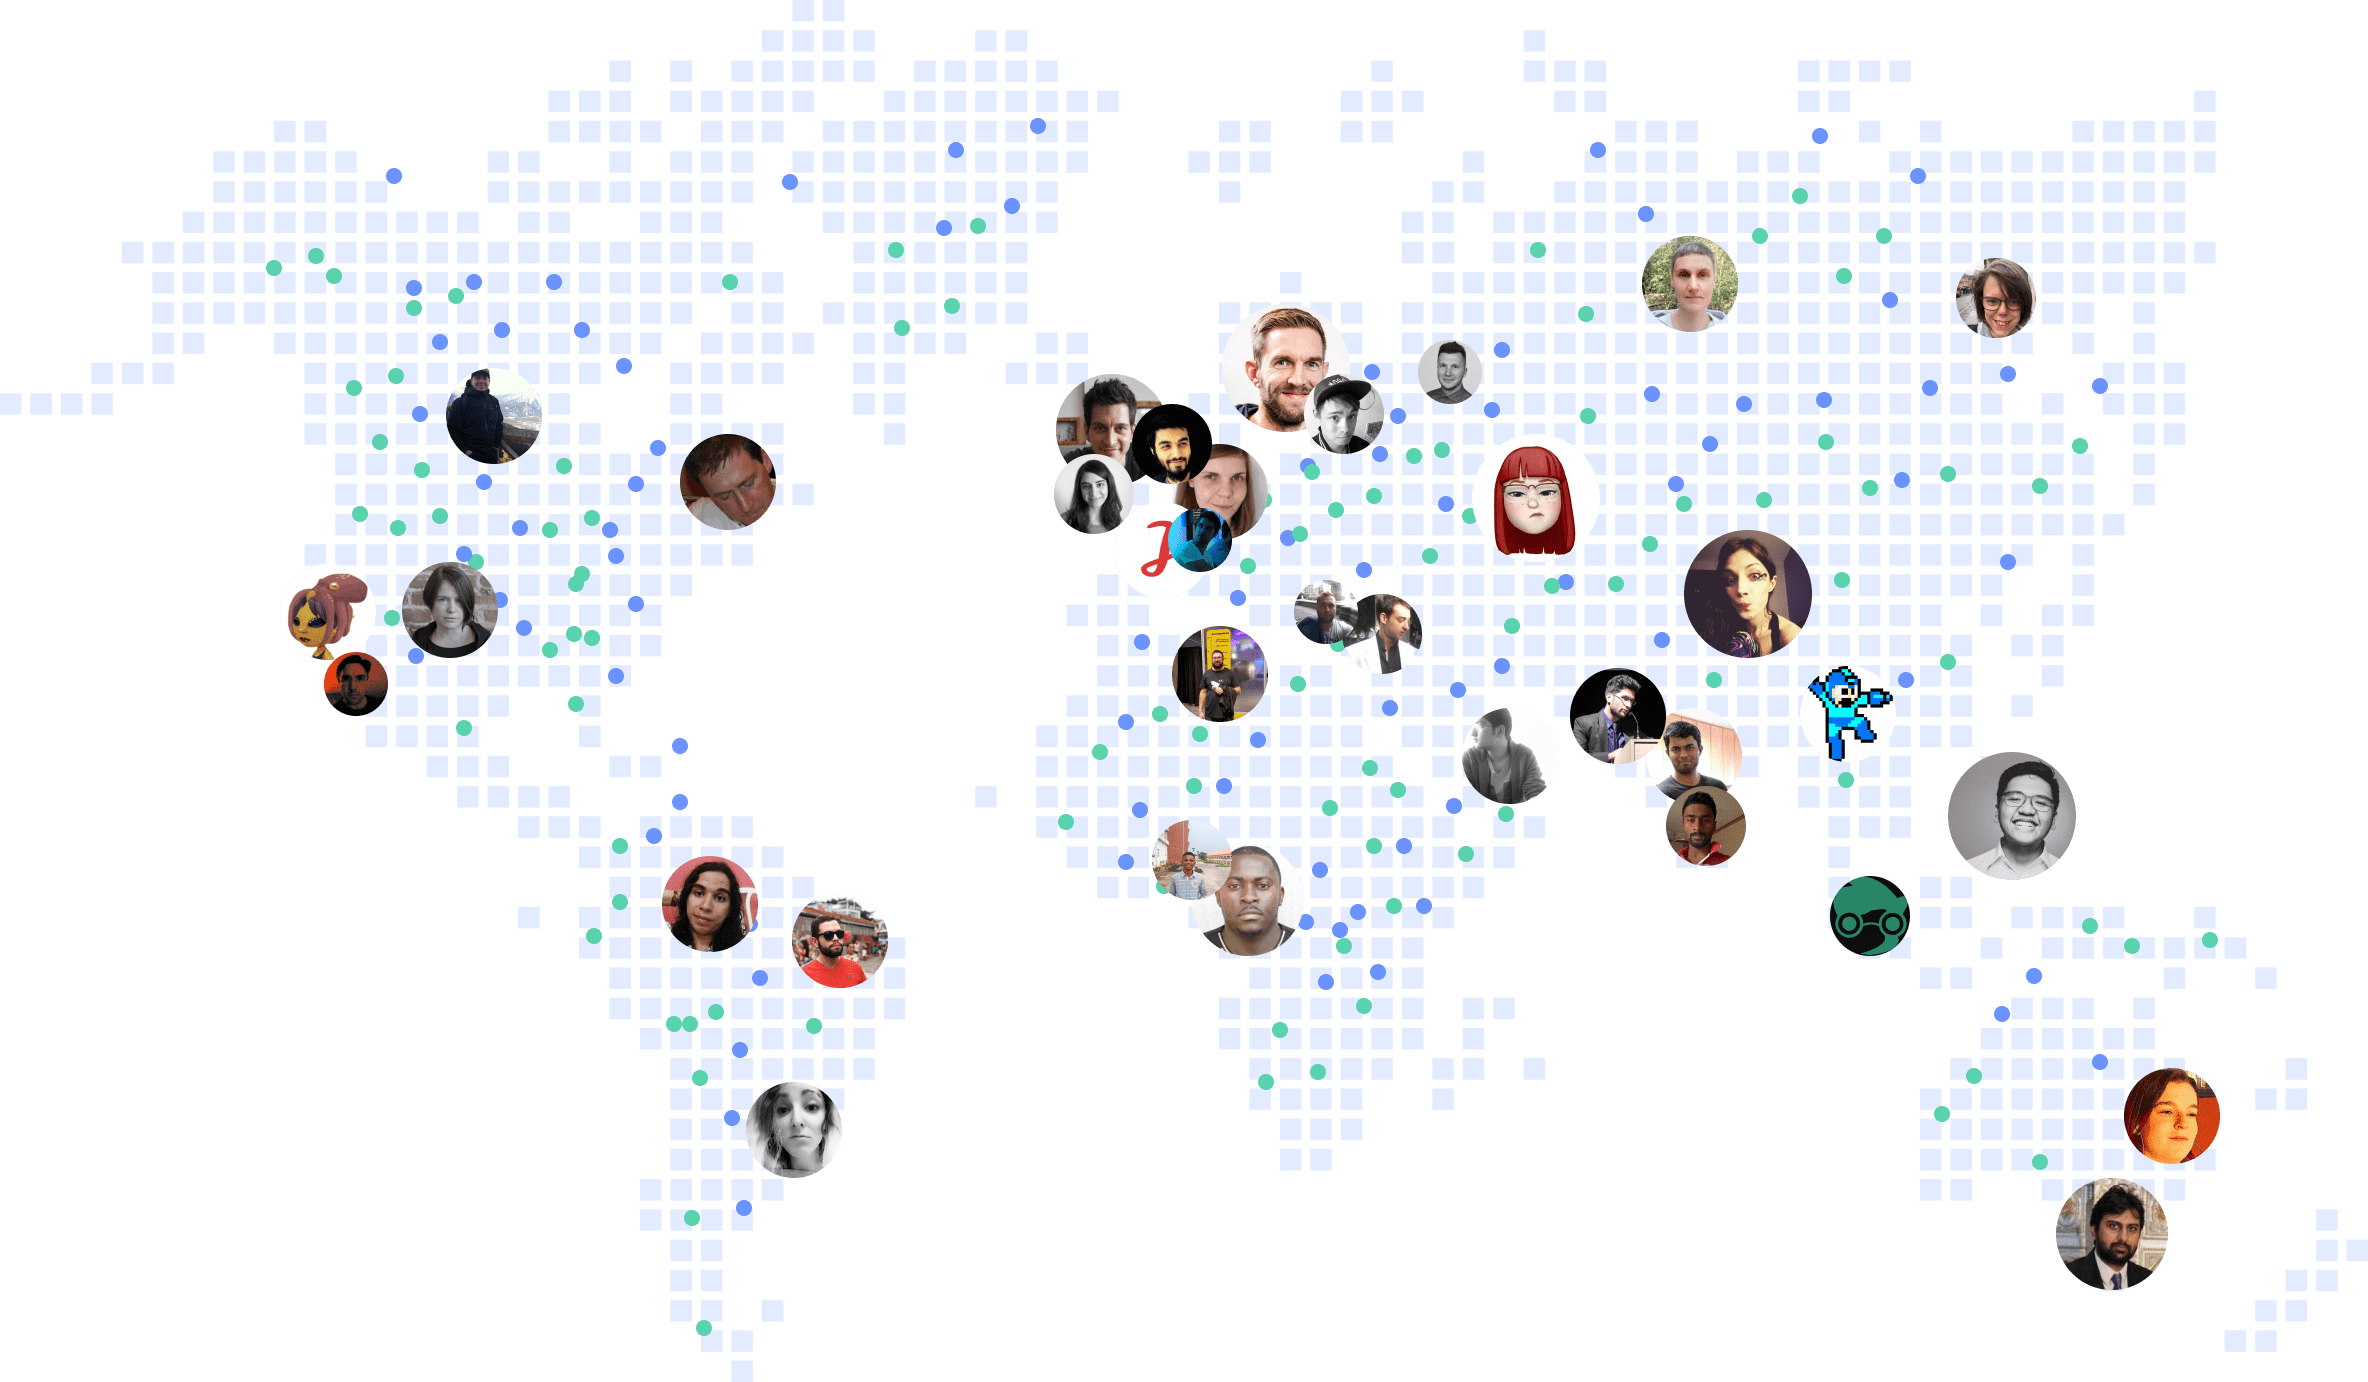 A world map containing avatars of Exercism contributors